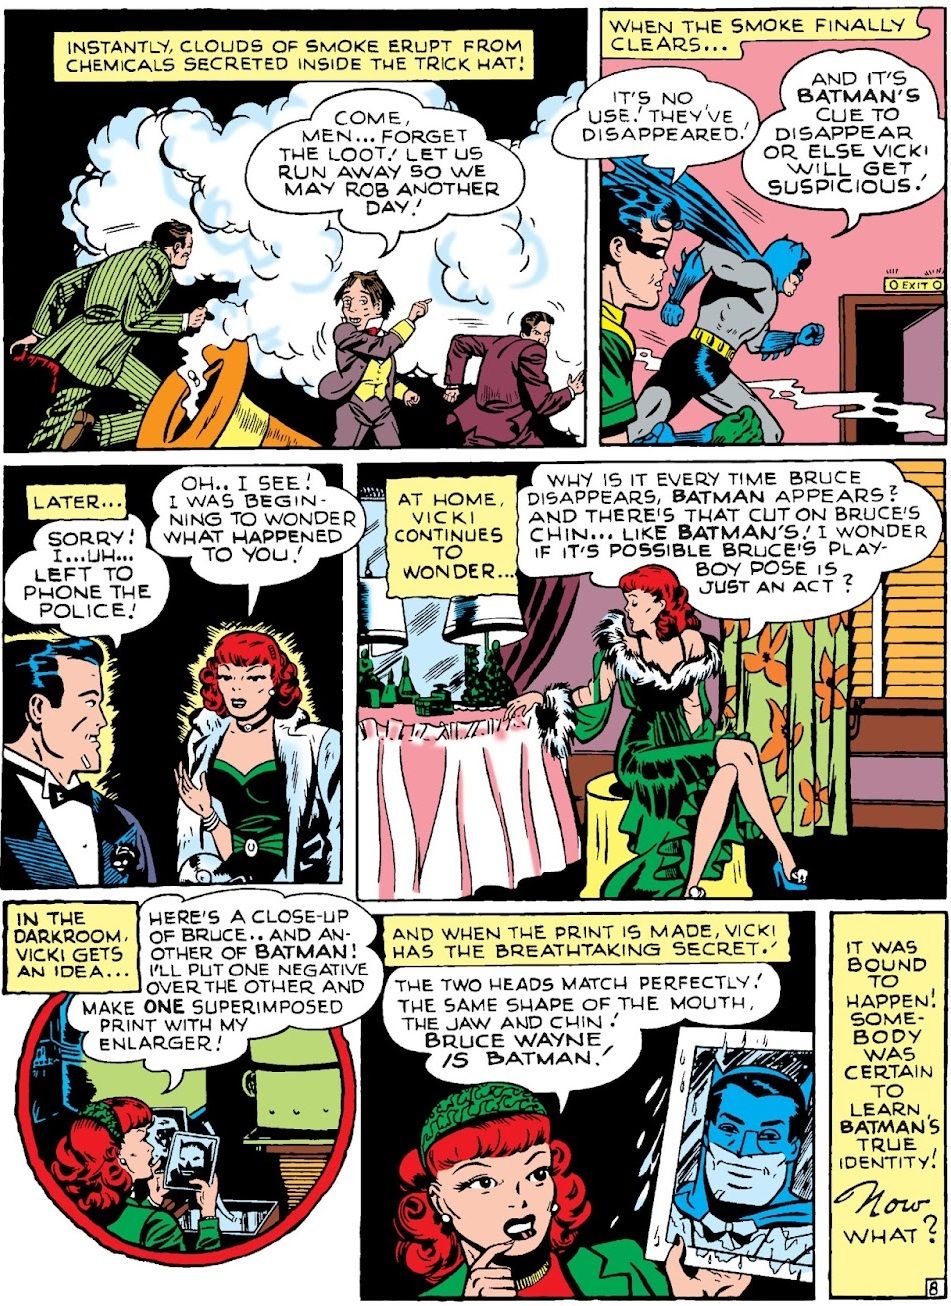 Vicki Vale now thinks Batman and Bruce Wayne are the same person